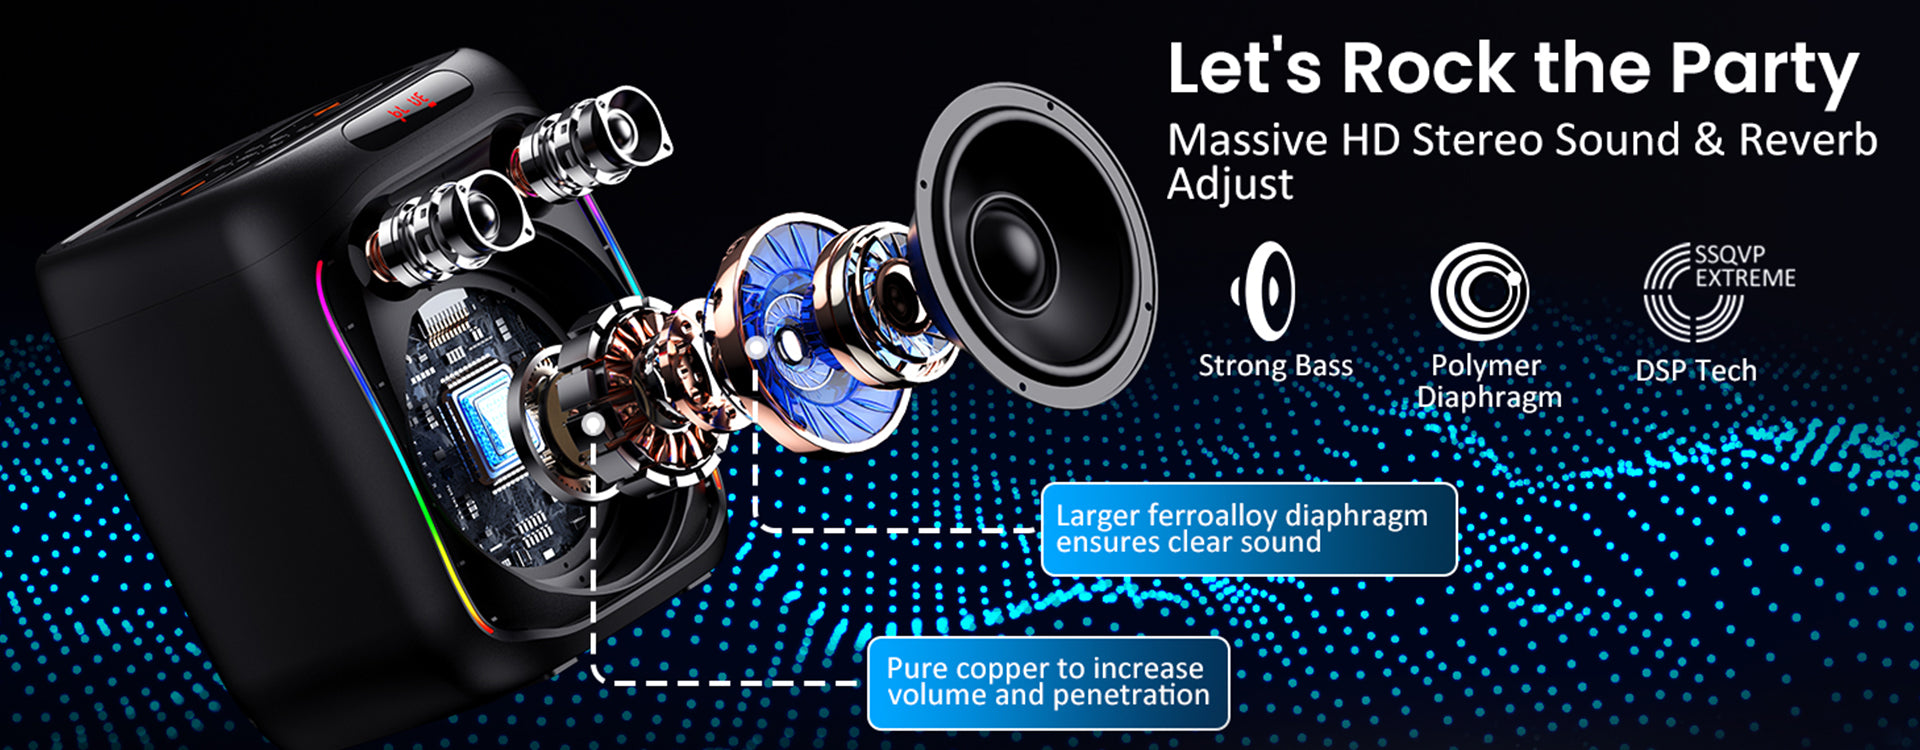 Let's rock the party with massive HD stereo sound, reverb adjust, strong bass, and larger ferroalloy diaphragm for clear sound.